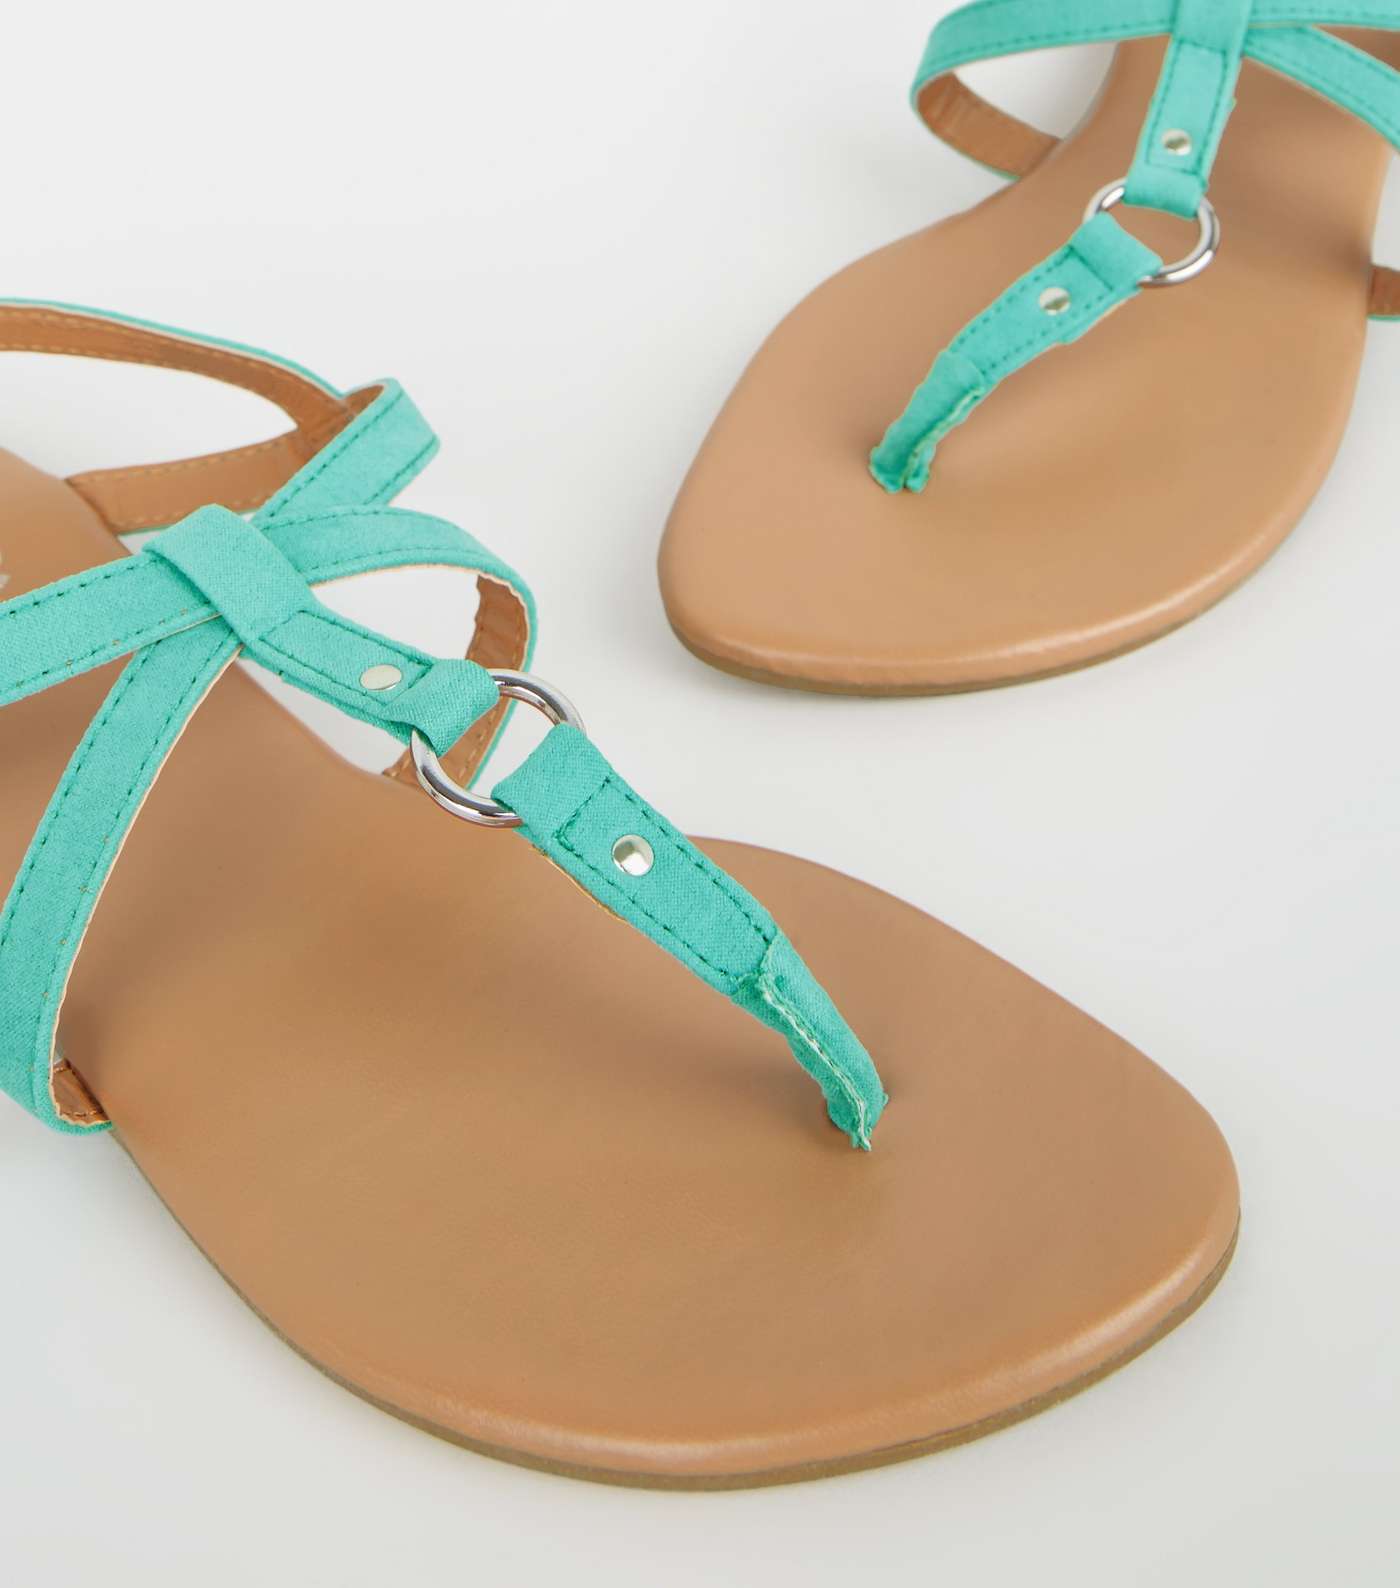 Girls Teal Suedette Strappy Sandals Image 3